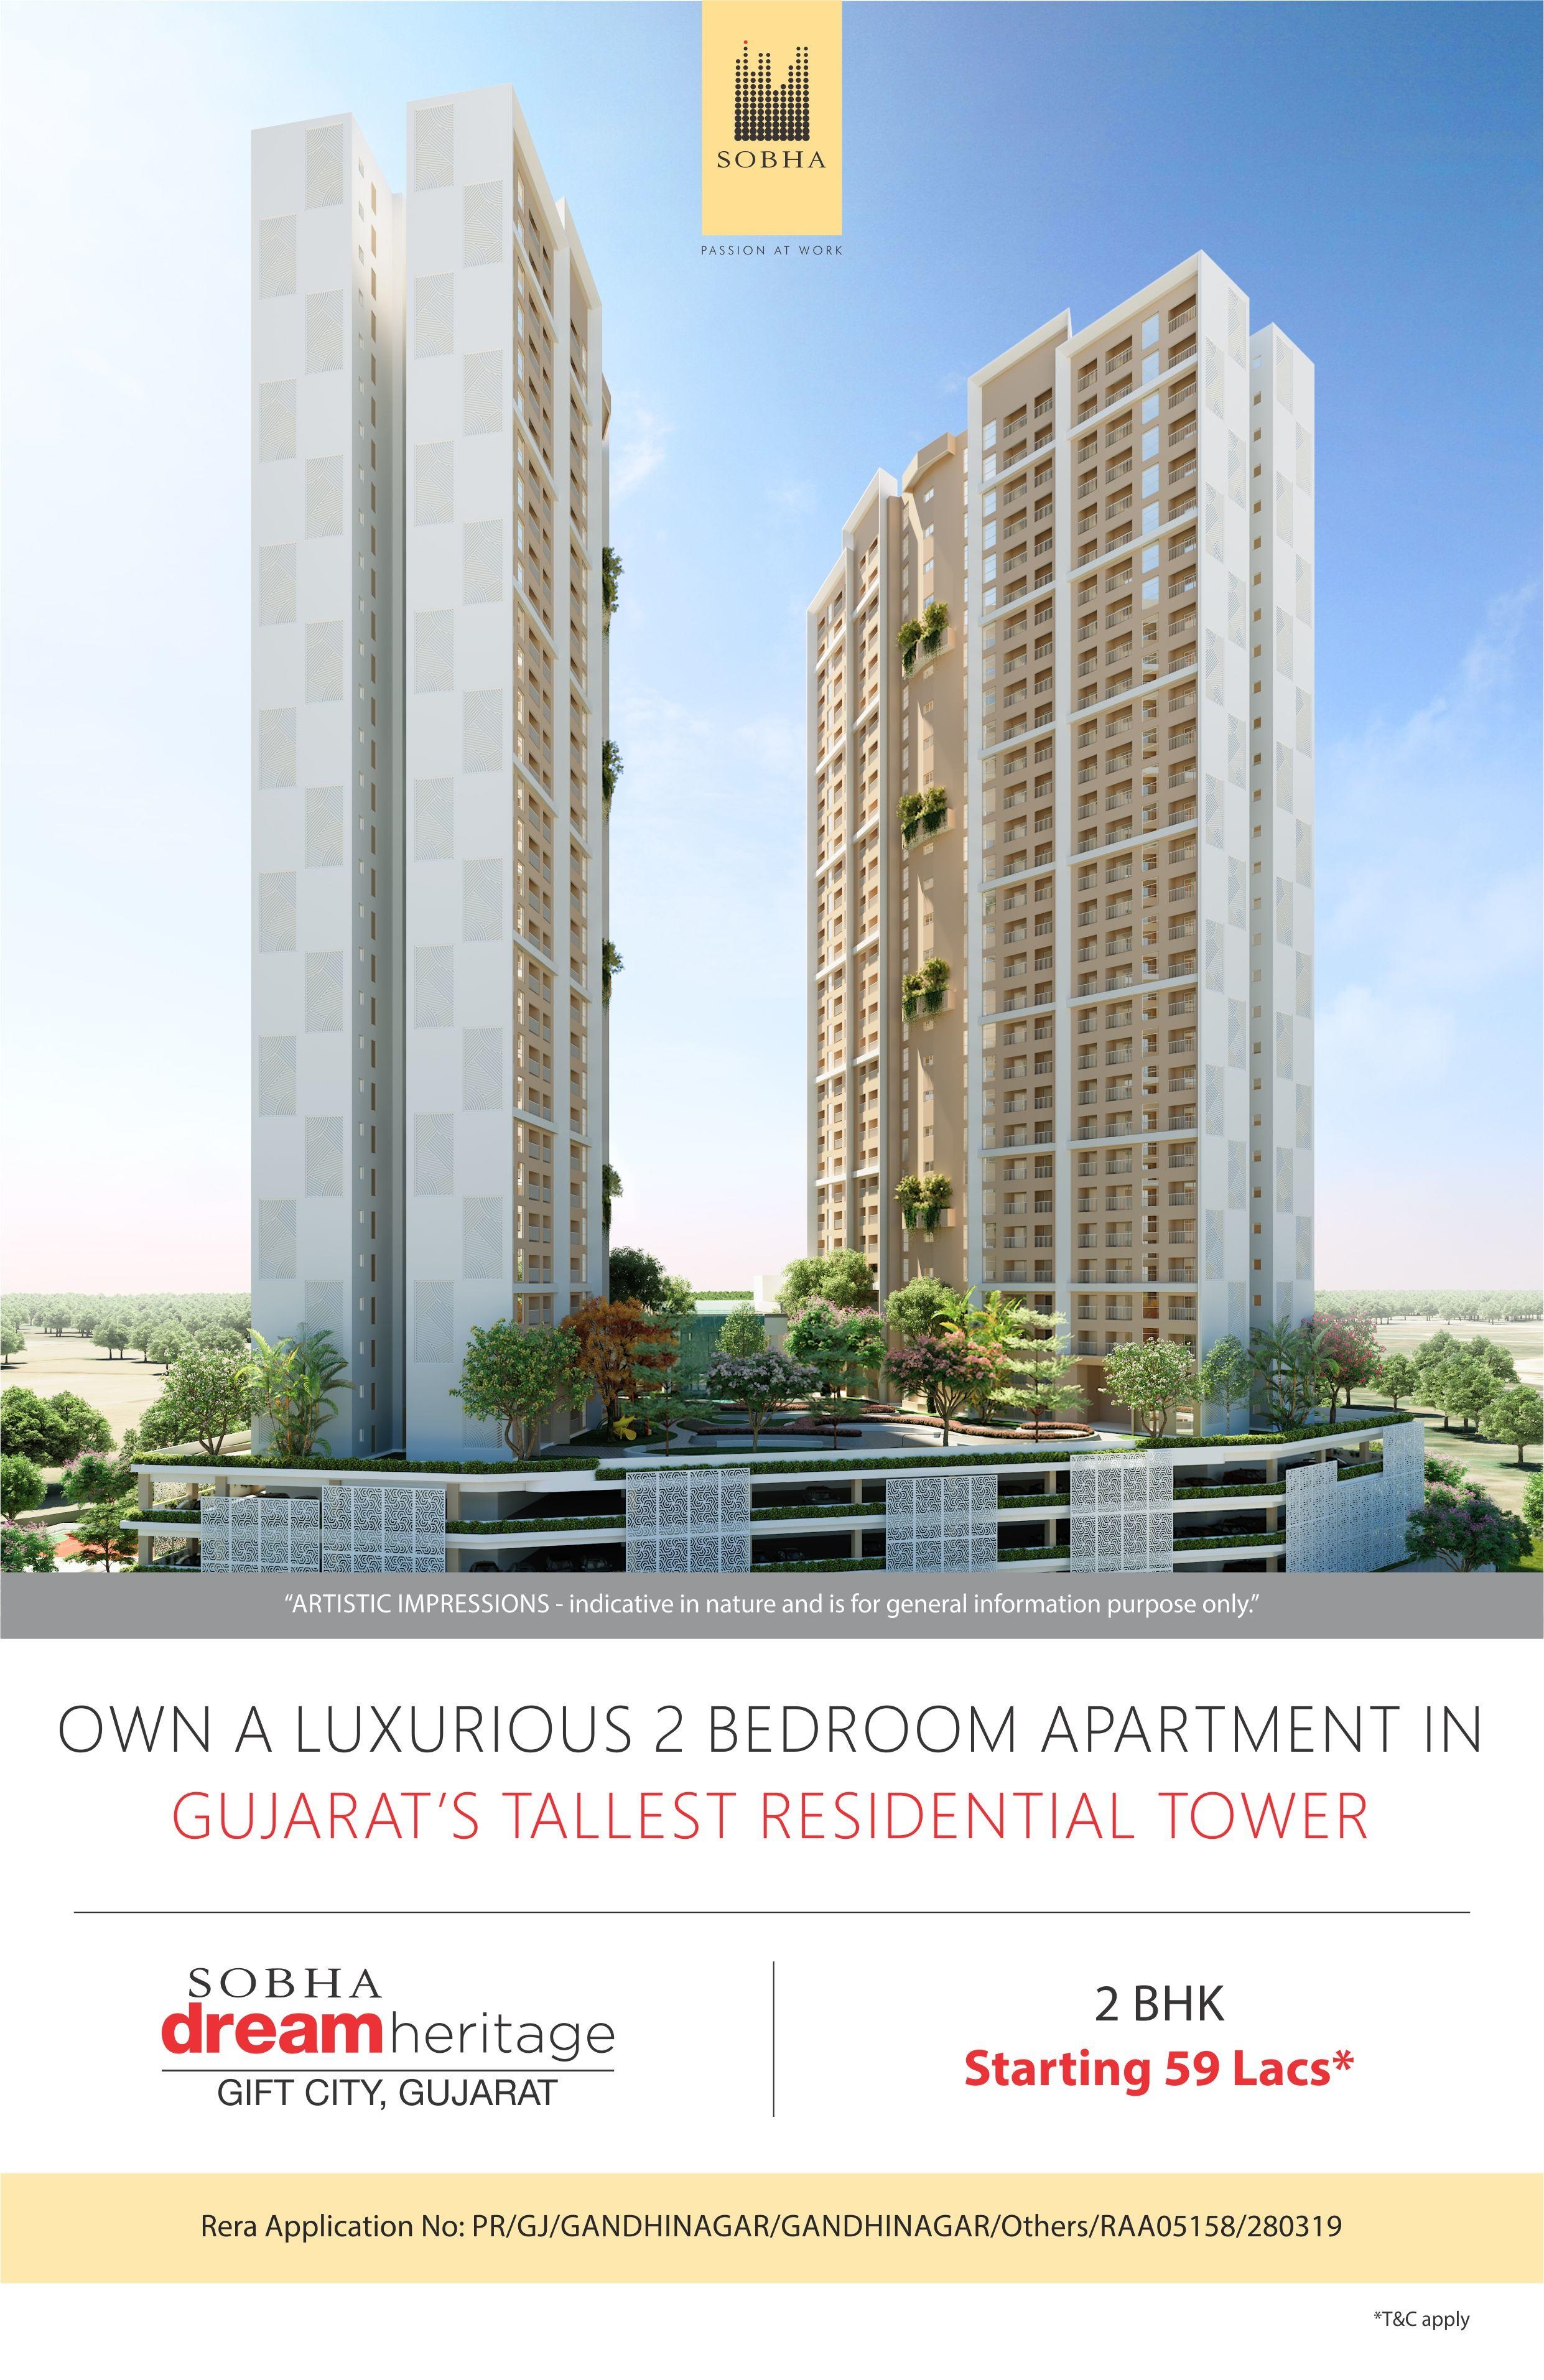 Own a luxurious 2 bedroom residences at Sobha Dream Heritage in Ahmedabad Update